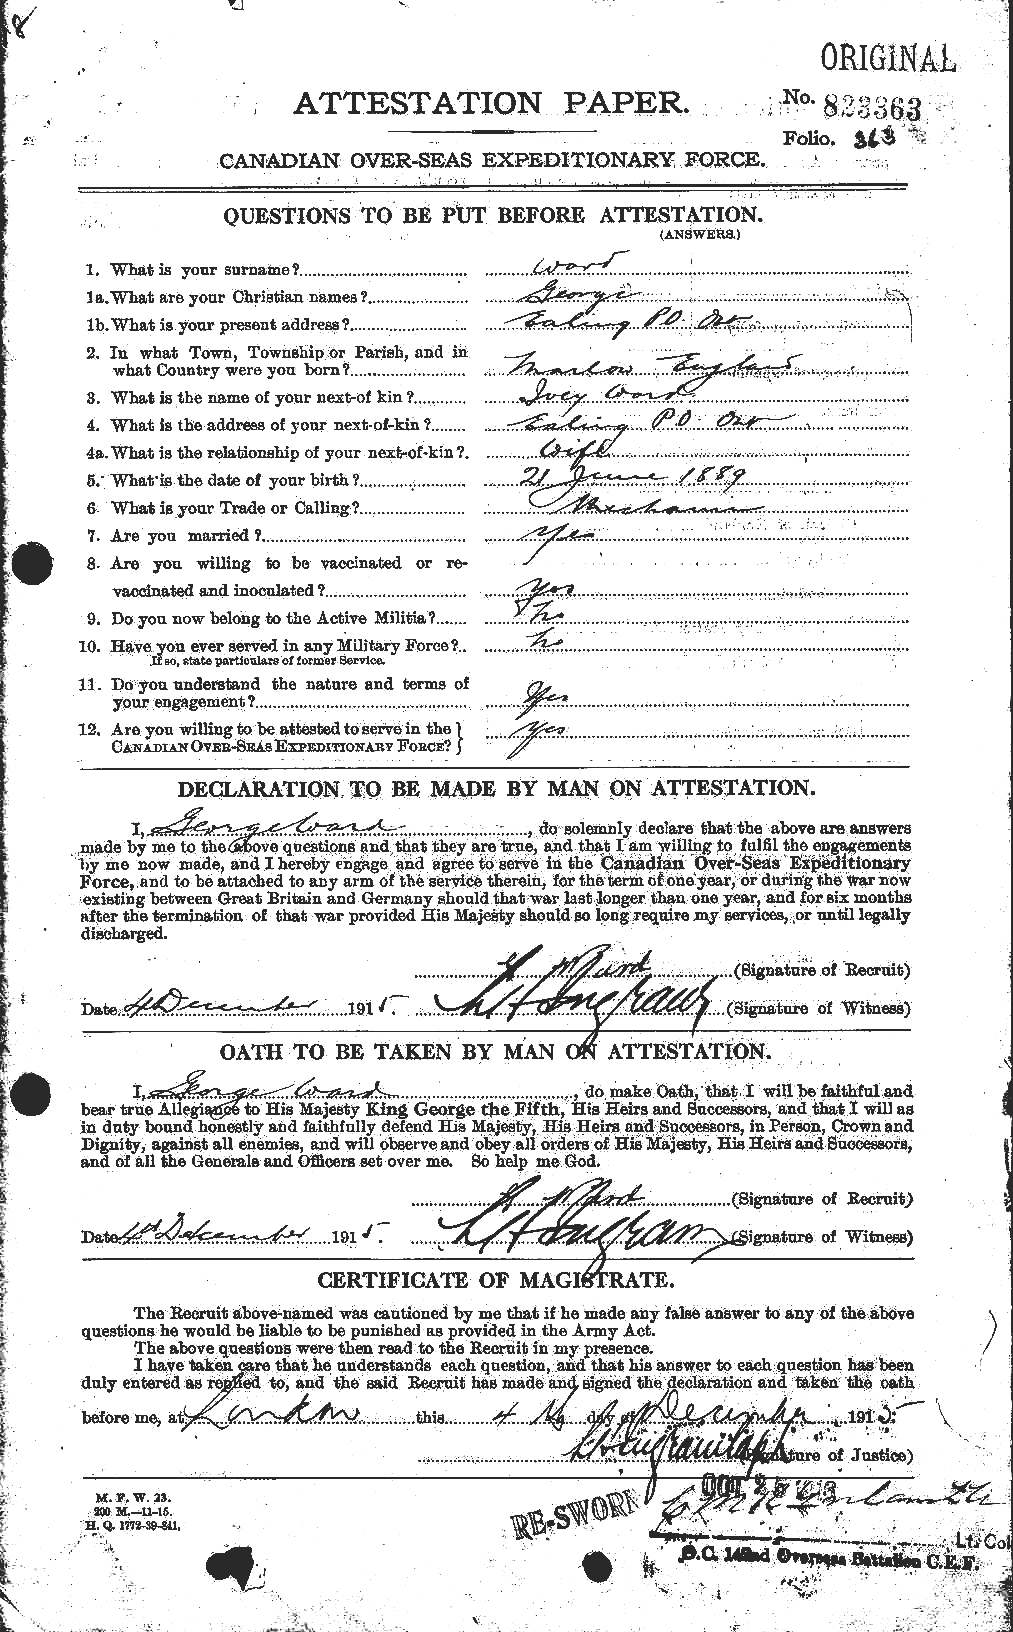 Personnel Records of the First World War - CEF 657739a